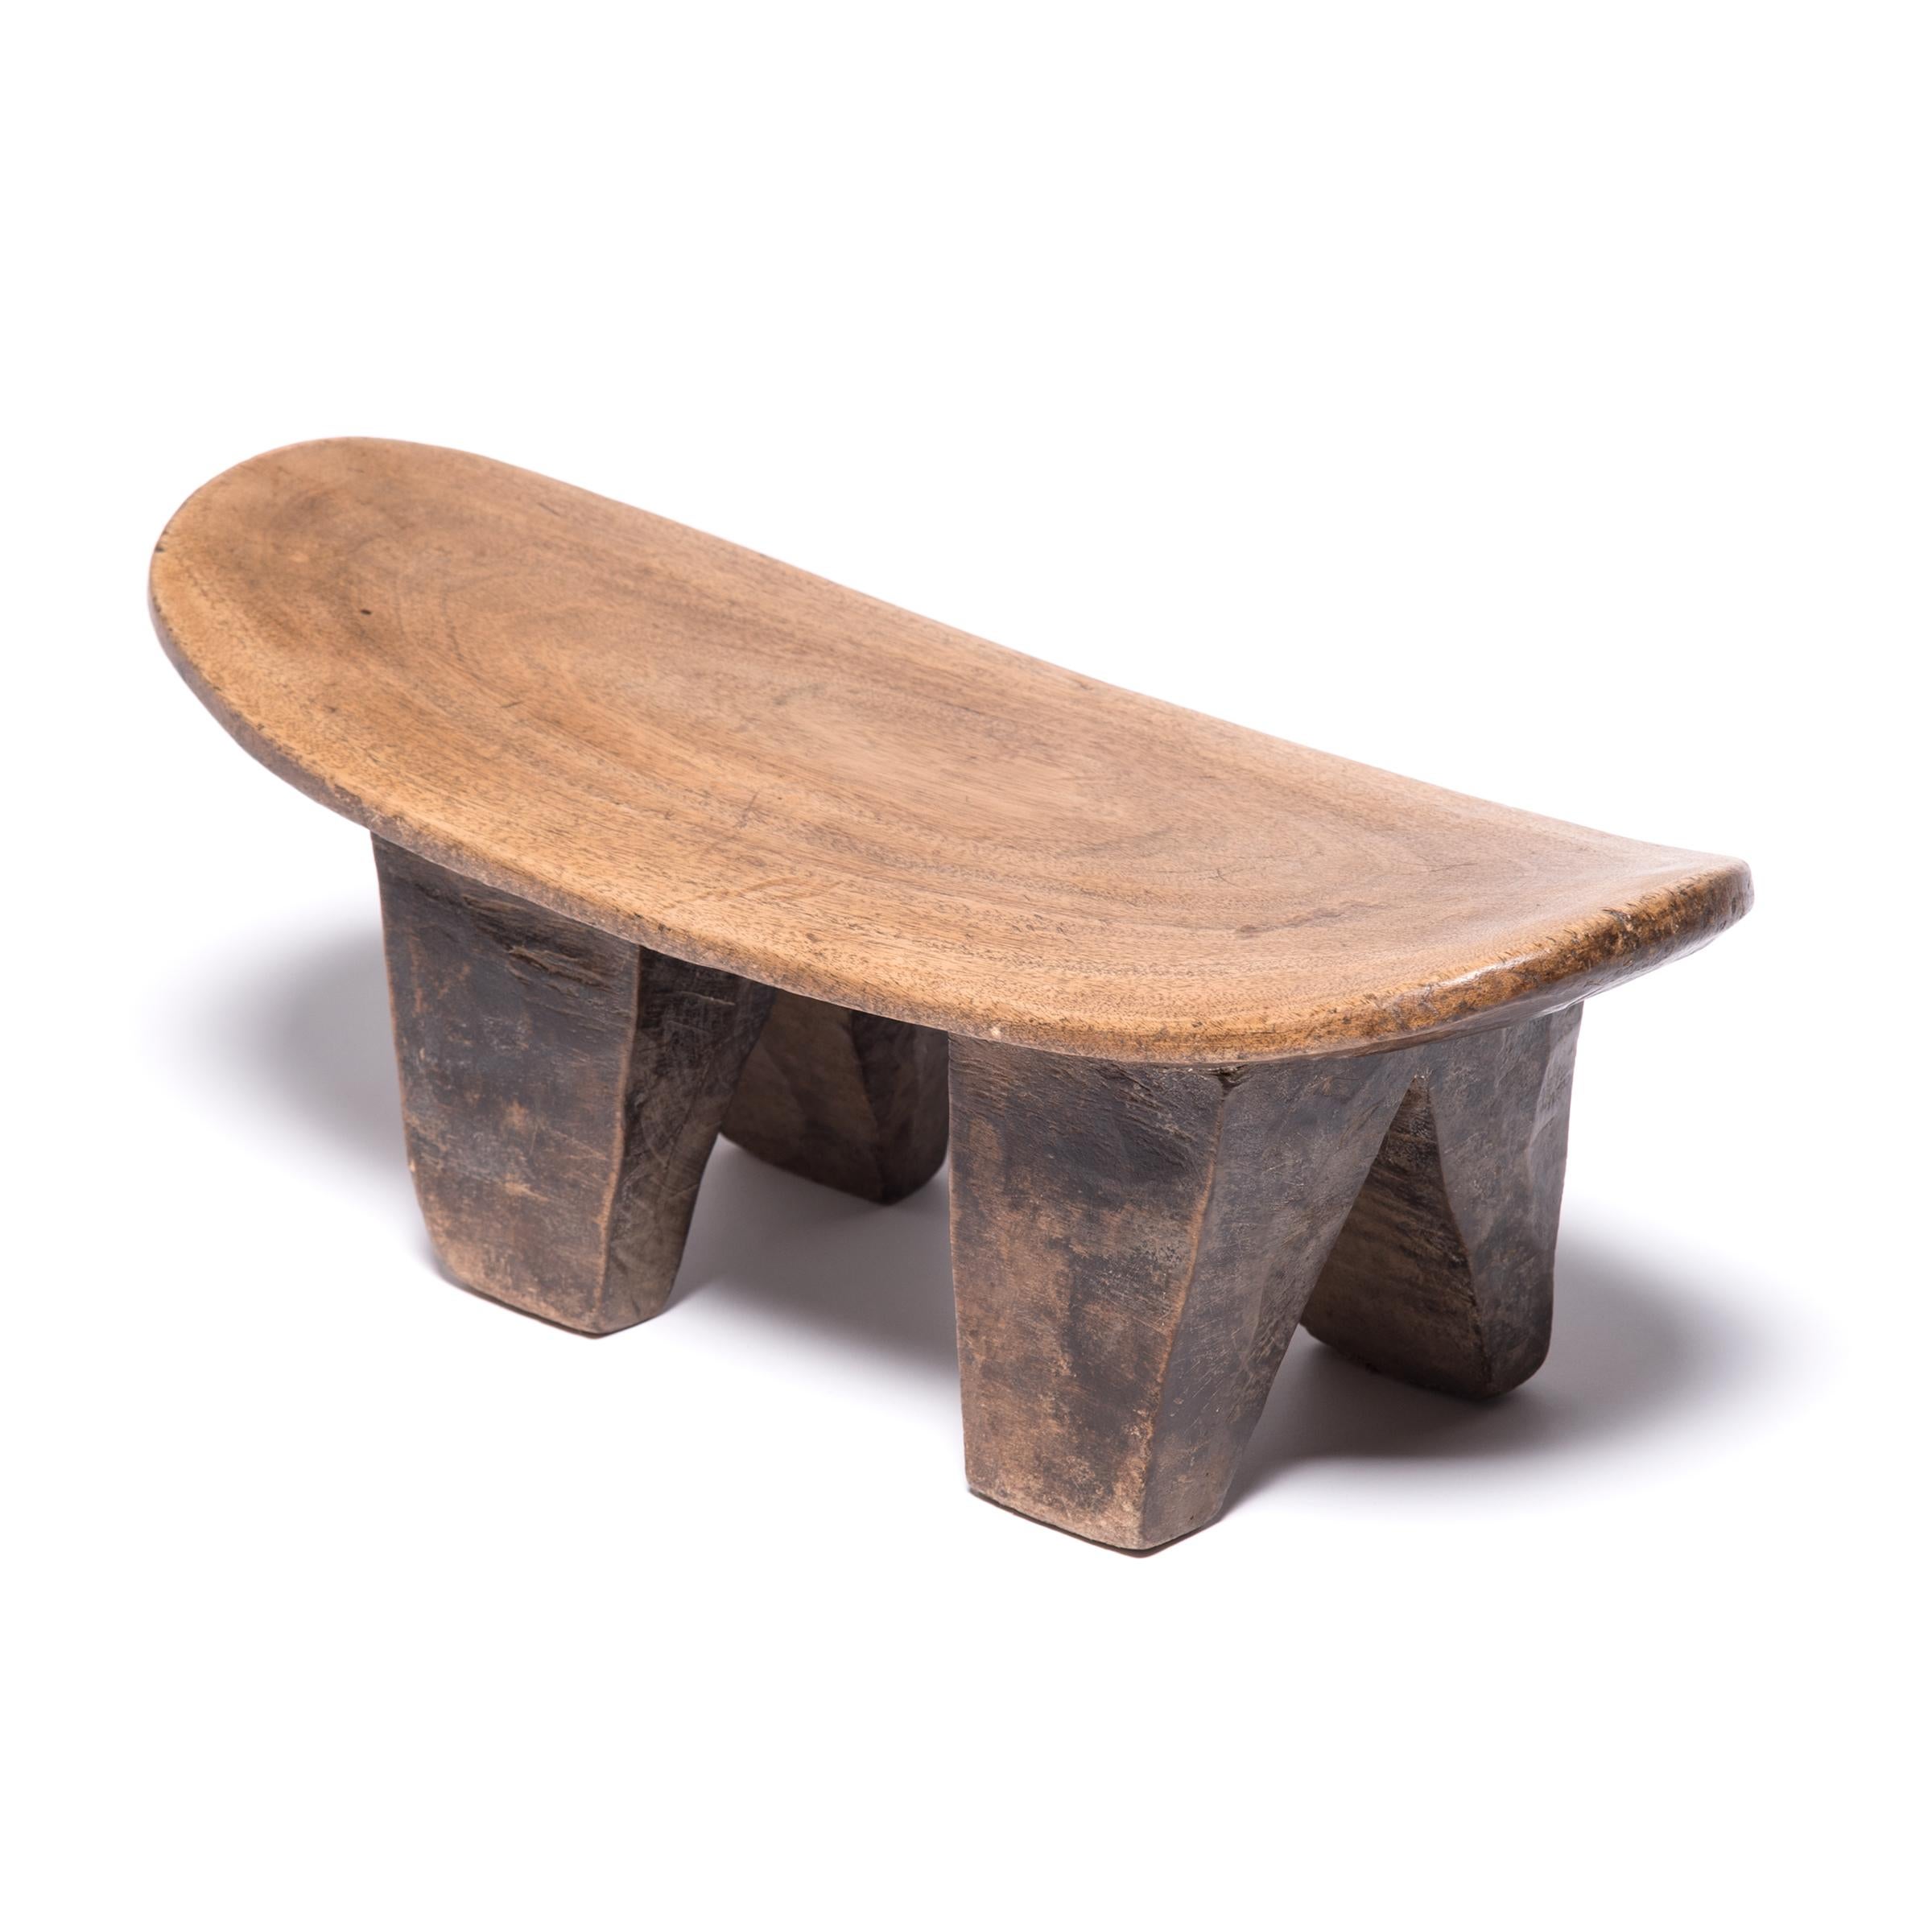 Hand-carved from a single, solid block of wood, each Senufo stool has a unique personality as a modern sculpture, seat, or table. The irregular strokes and diminutive nature are telltale signs of this traditional woodcarving practice. Note the